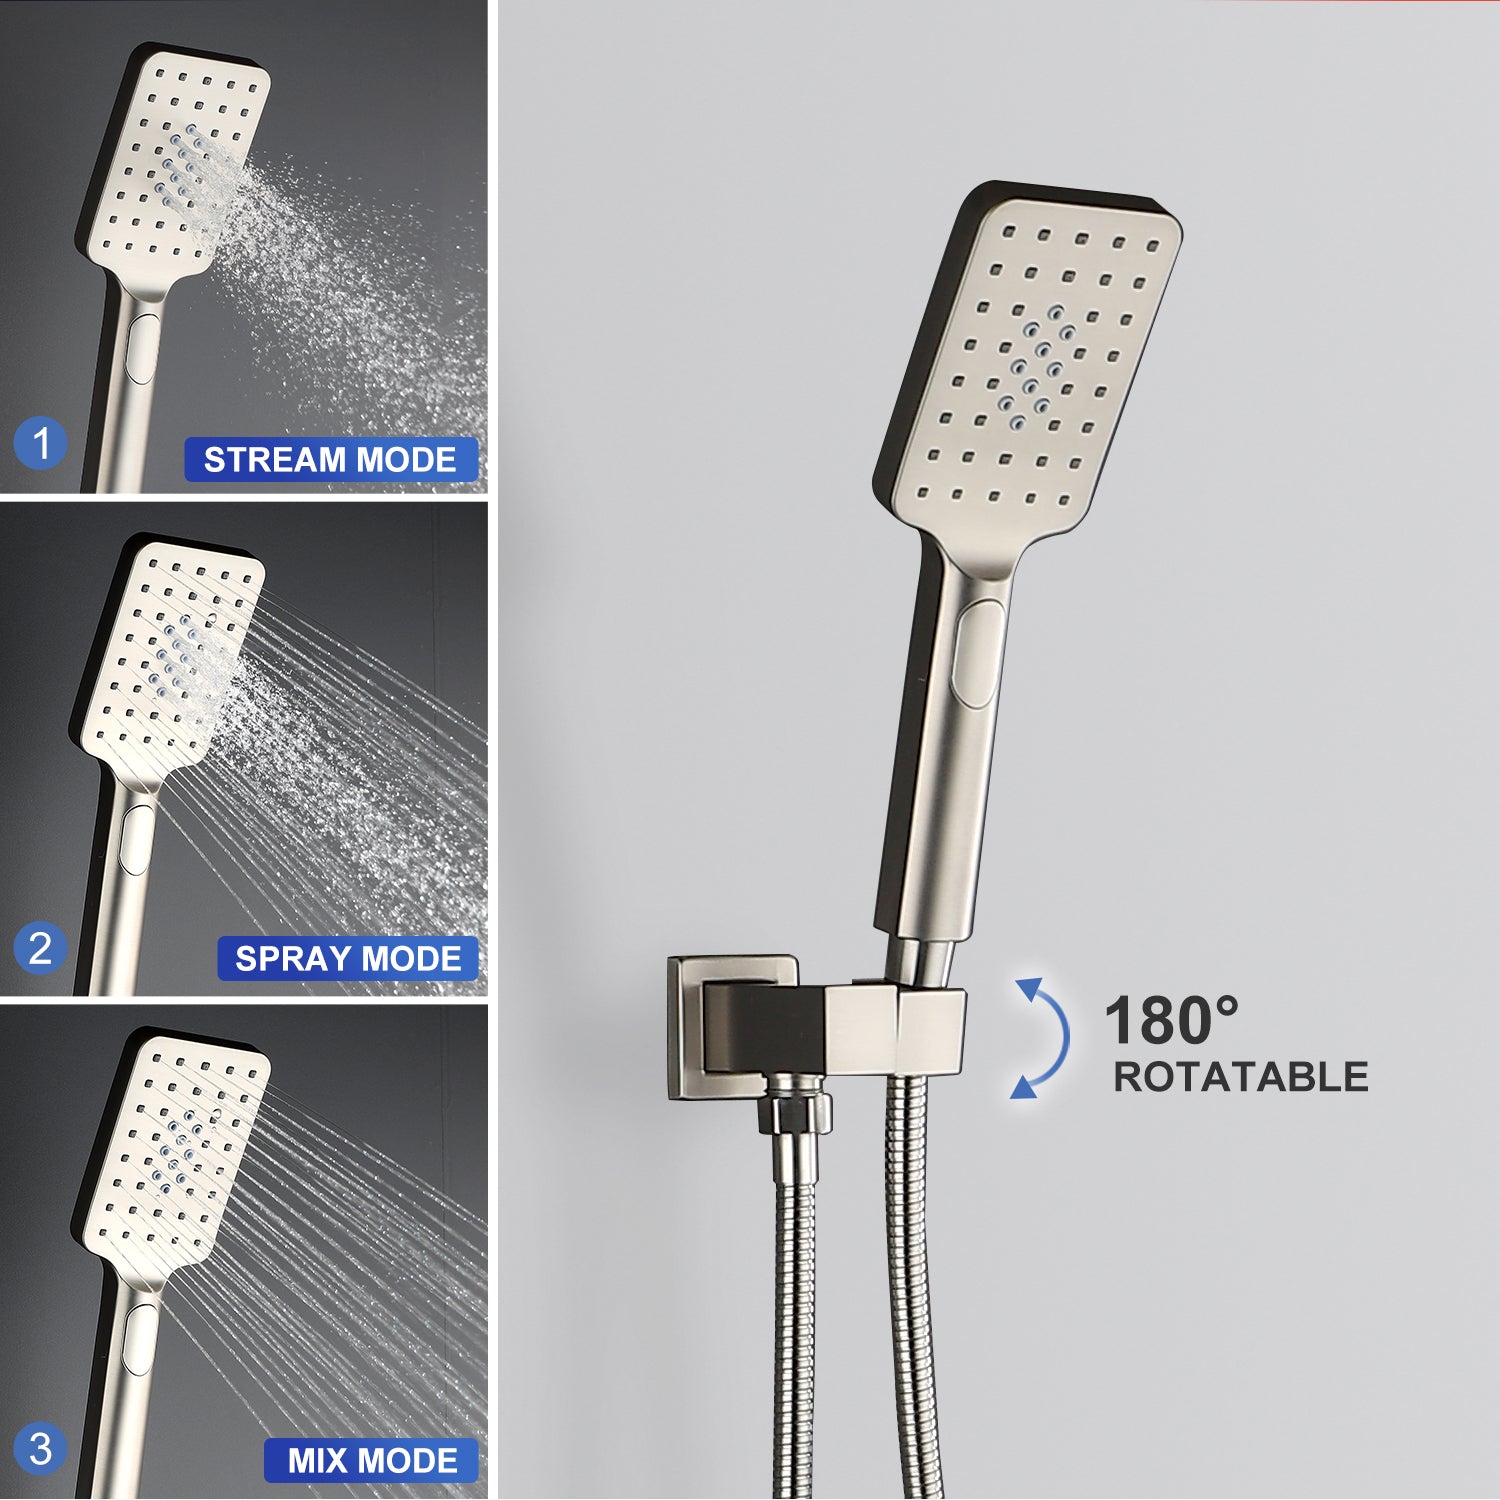 【Rainlex RX98103-10】10" Shower Head Three Functions Wall-Mount Balance Square Square Shower Faucet(Rough-in Valve Included)